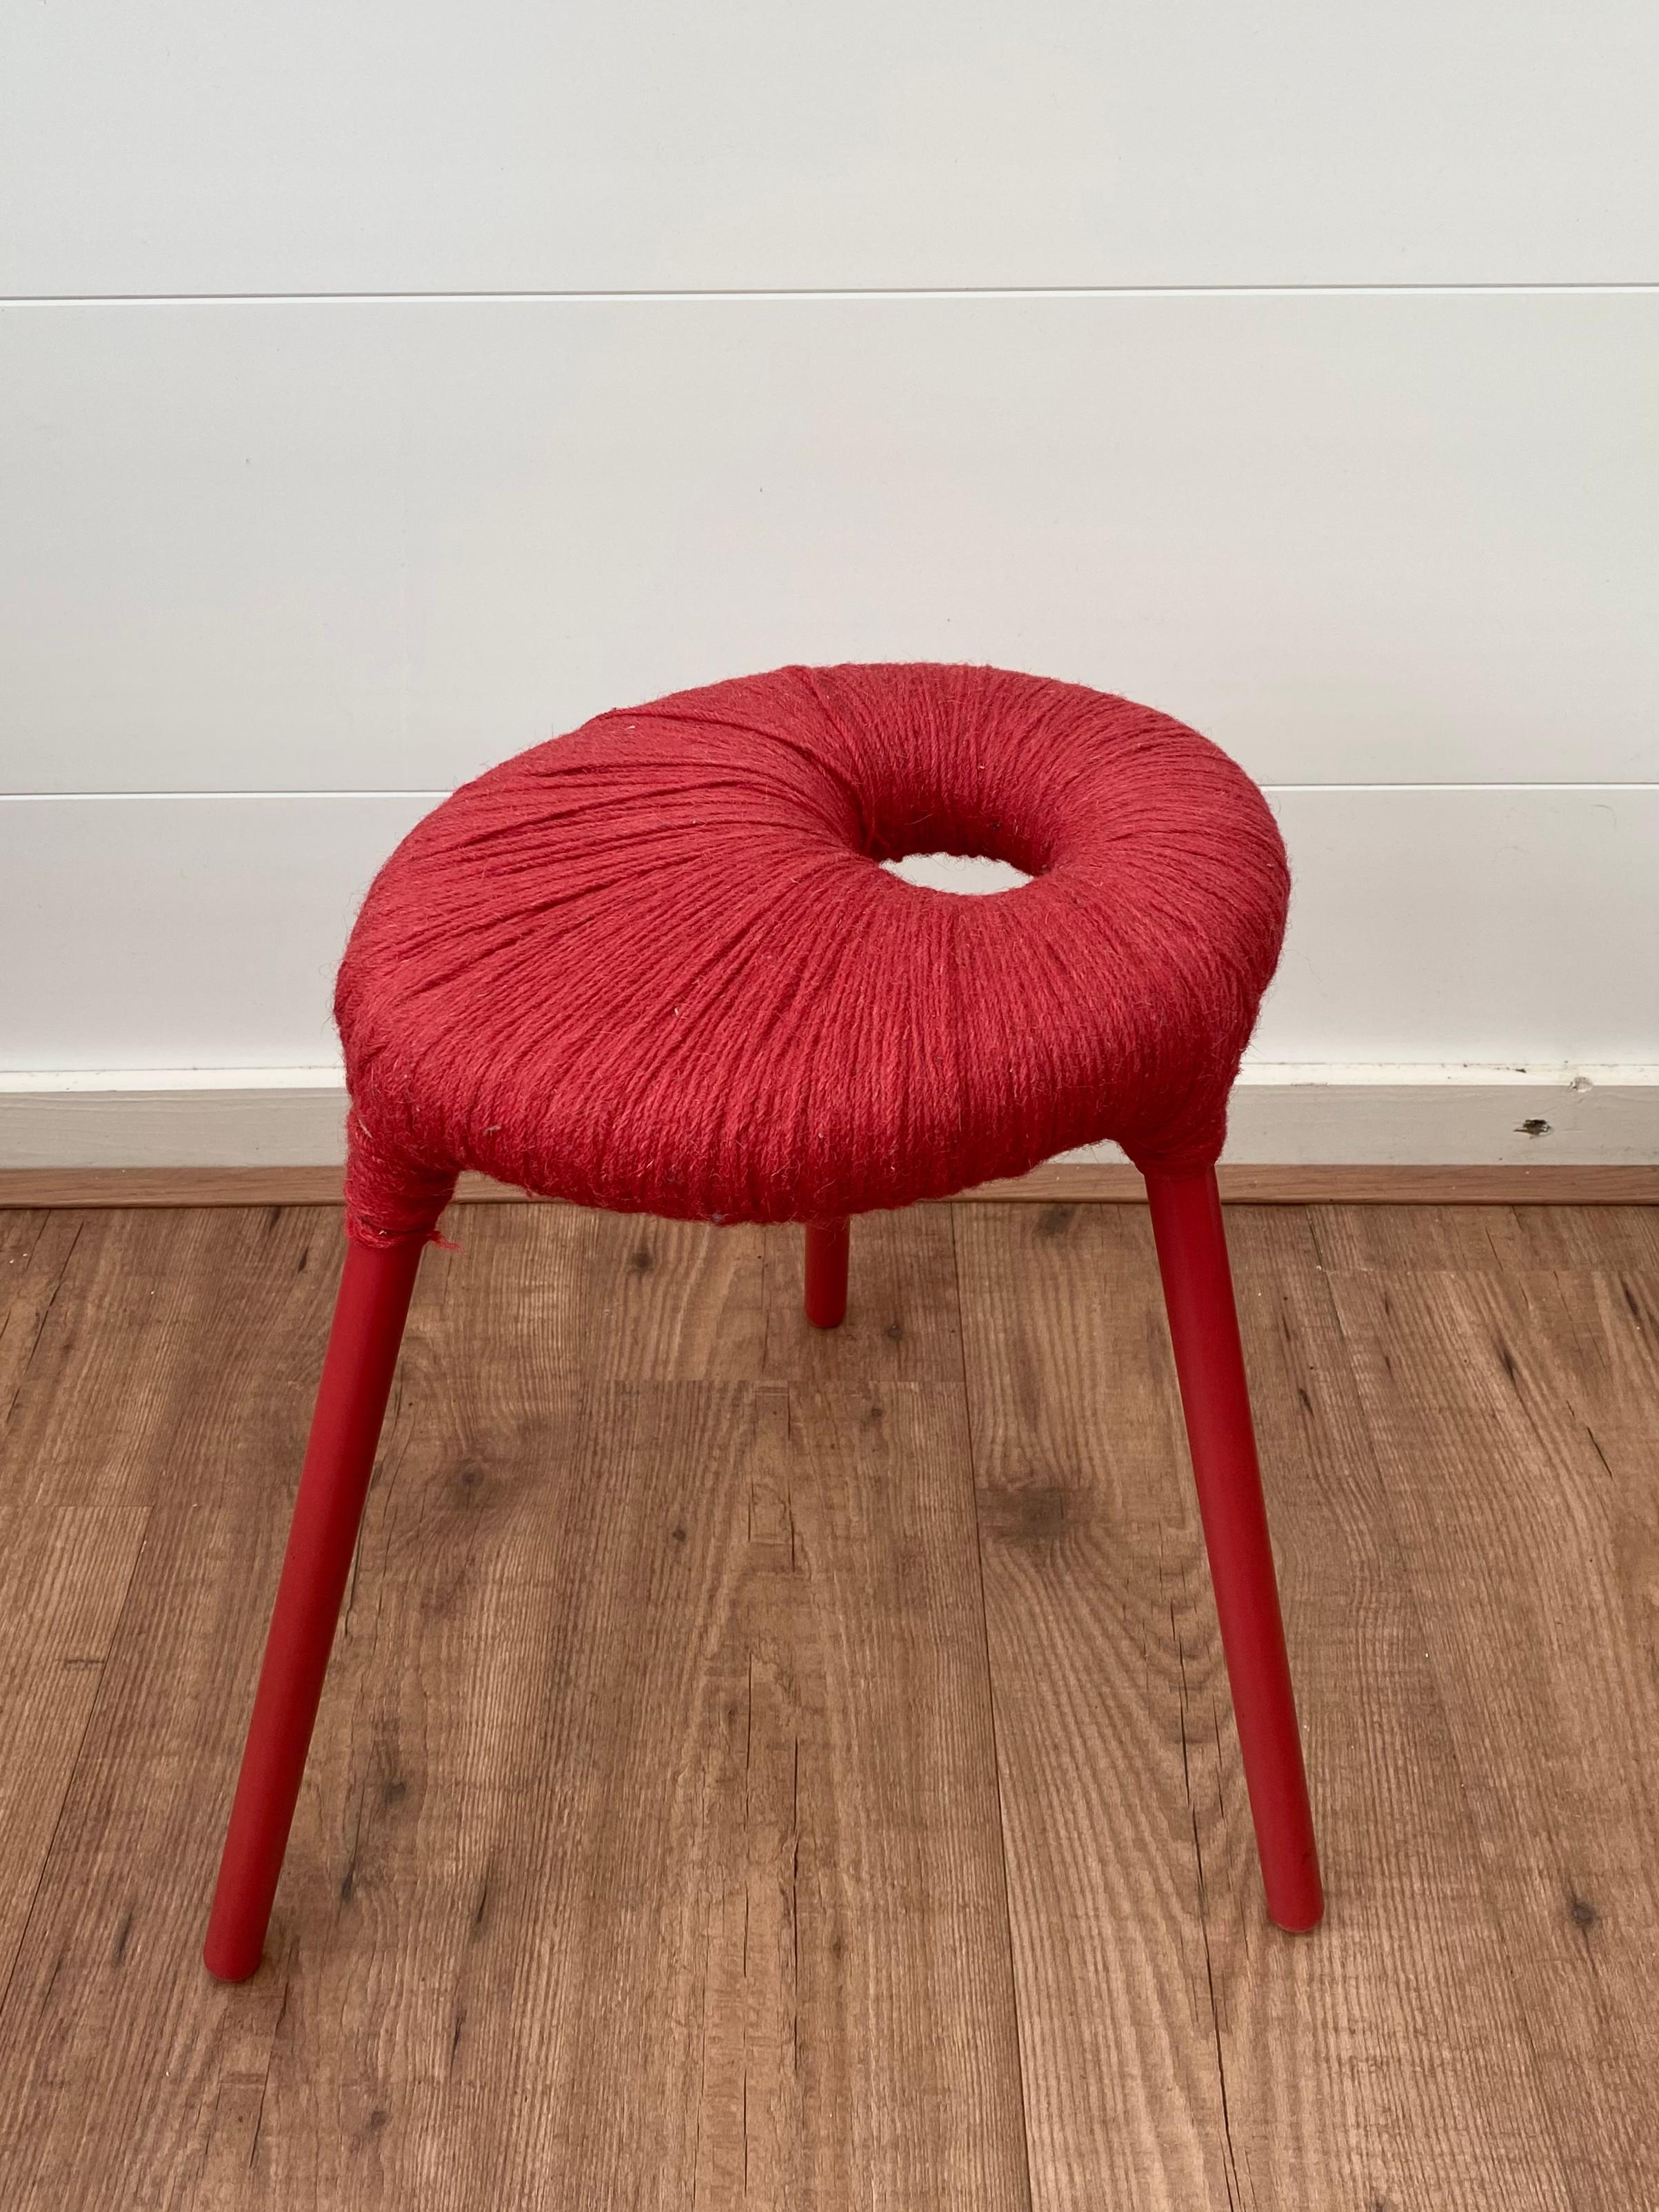 Scandinavian Modern stool, model Eskilstuna, from the Ikea PS series, 1999. The stool features a Red Lacquered Tubular Metal Base with a Red Wool Seating. The piece was Designed by Findlay, Graeme, McElroy and Carmen. 
While the stools were only